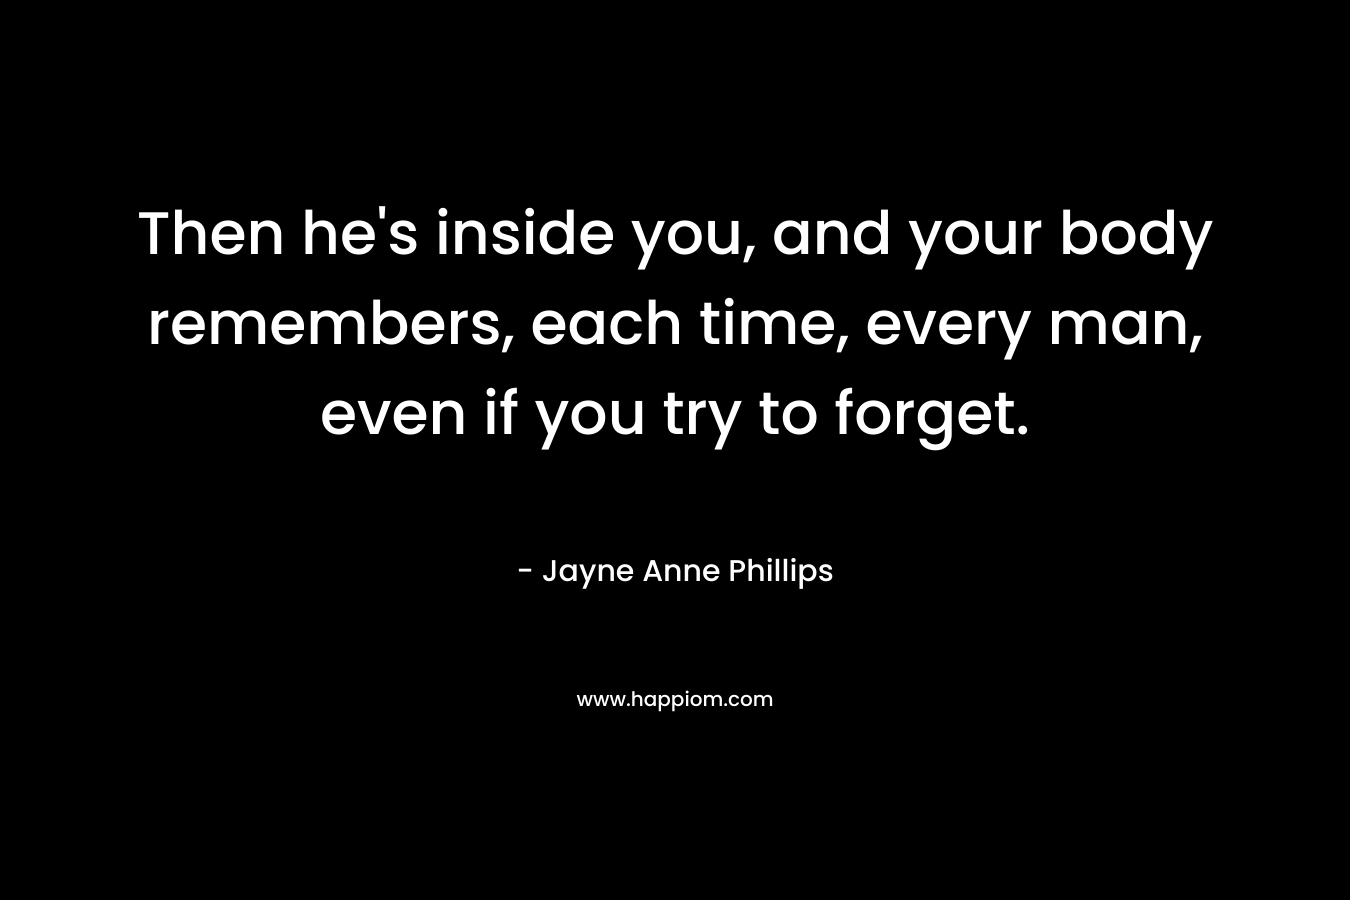 Then he’s inside you, and your body remembers, each time, every man, even if you try to forget. – Jayne Anne Phillips